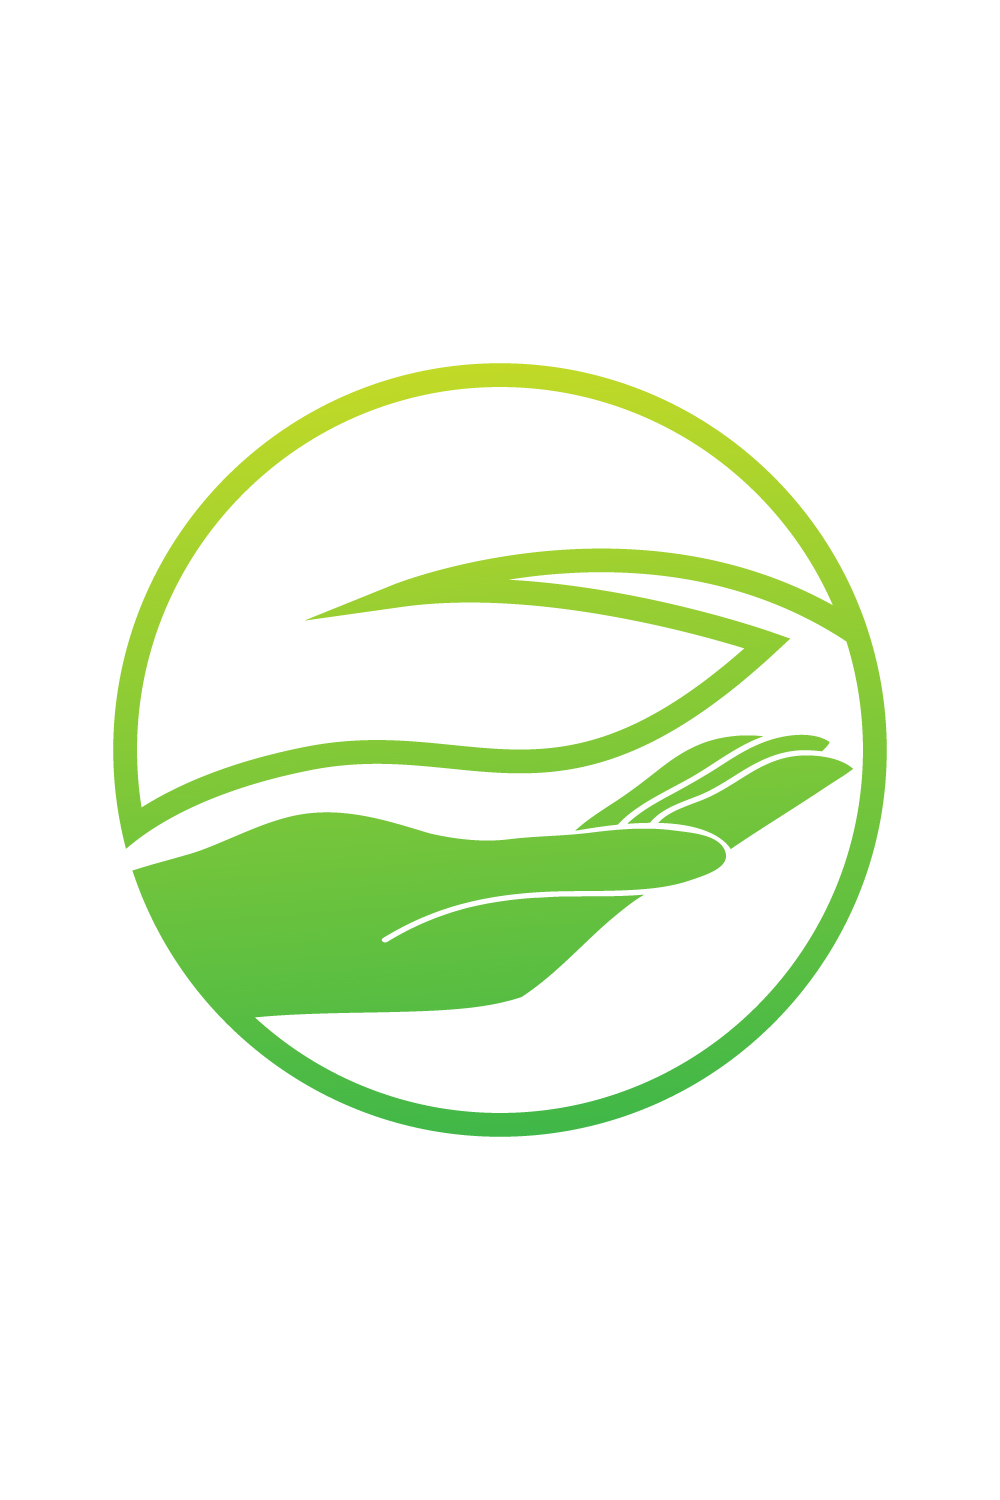 Fresh Hand and Leaf logo for health pinterest preview image.